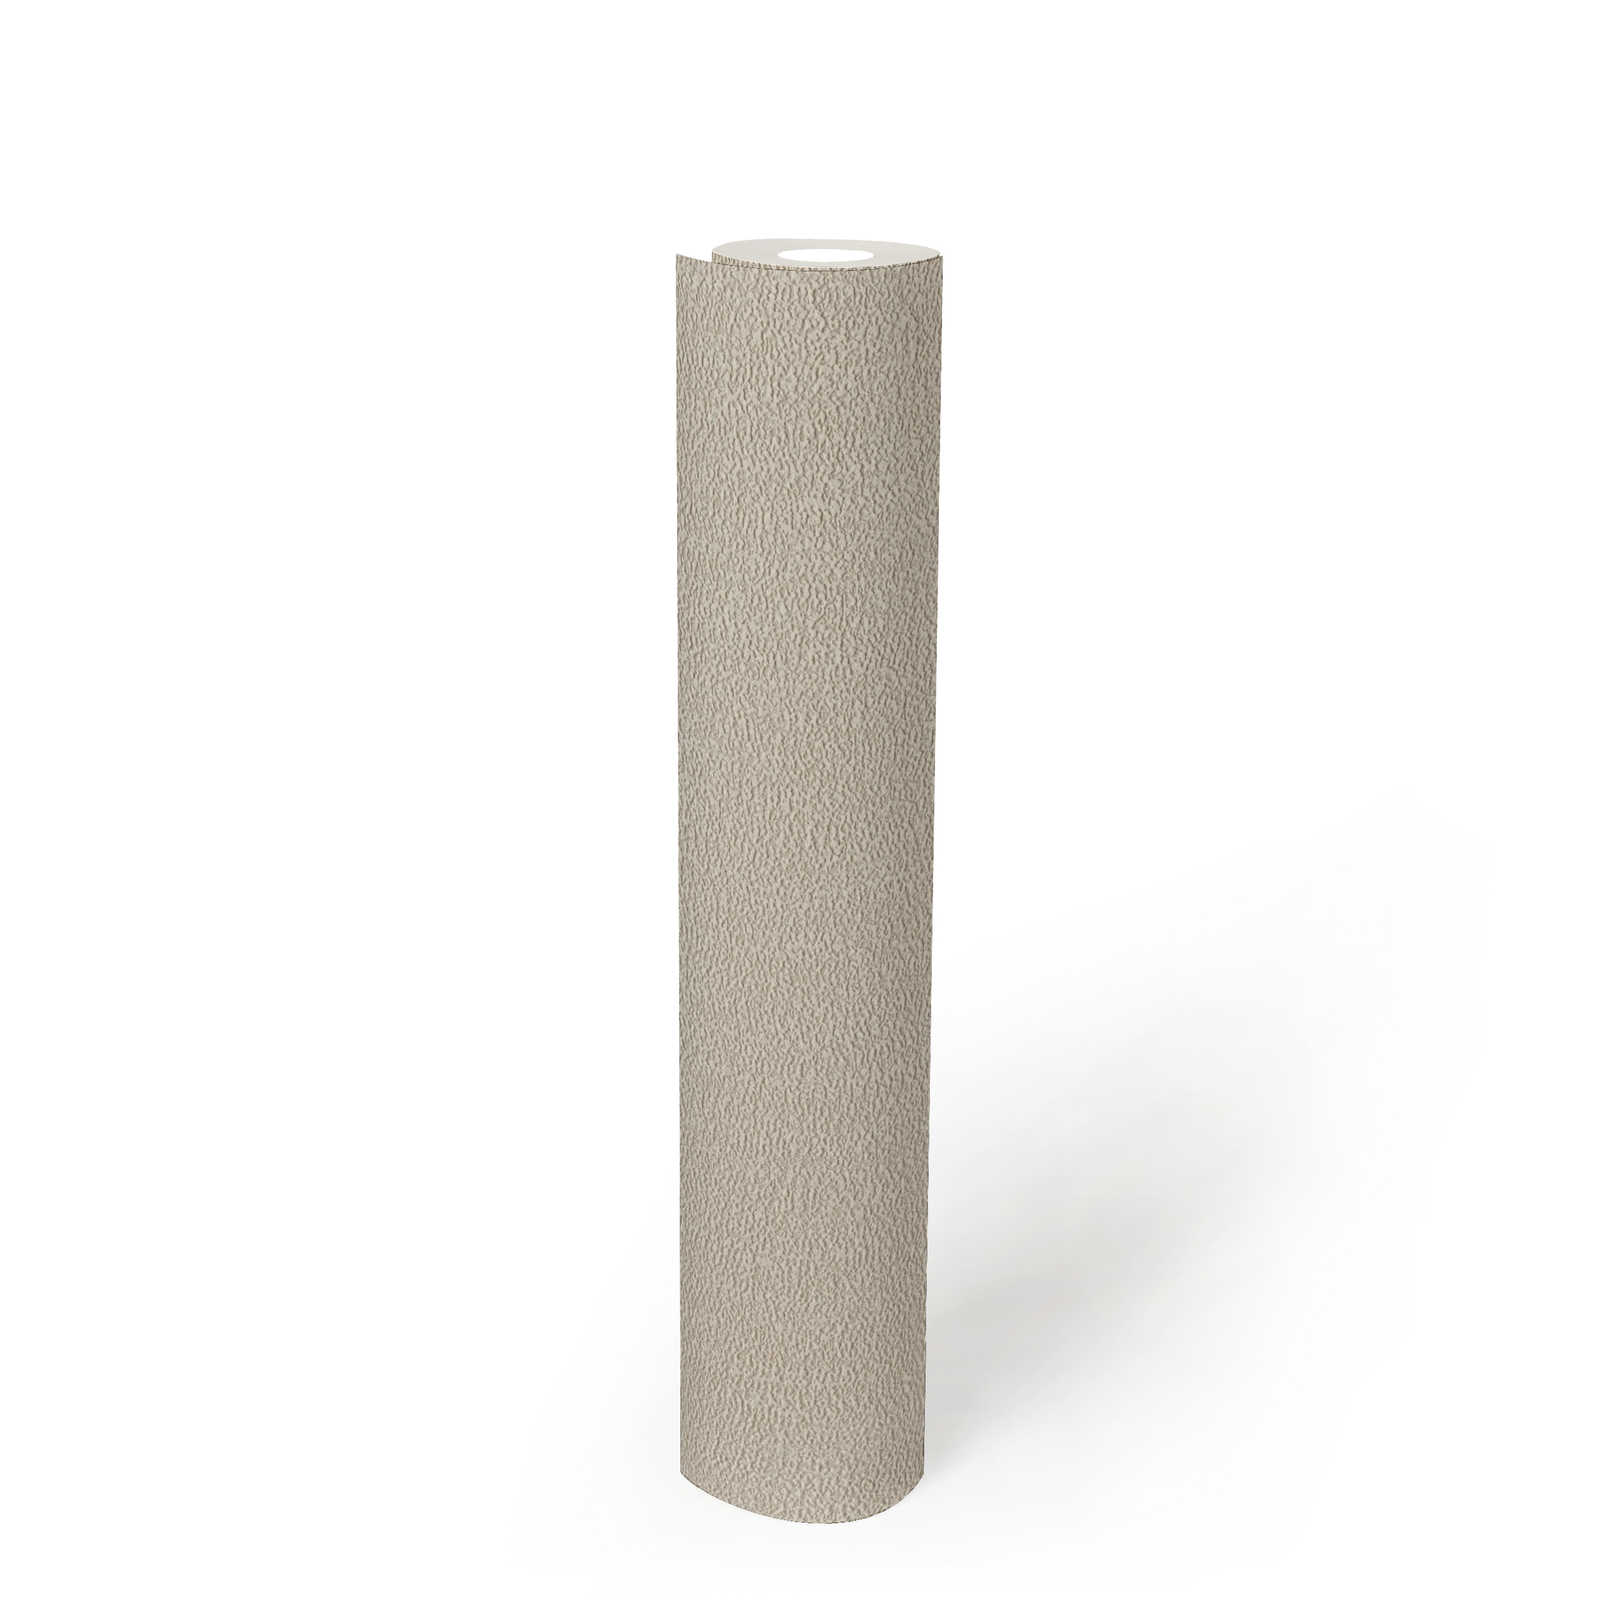             Plain wallpaper with structure with a slight sheen - beige, grey, silver
        